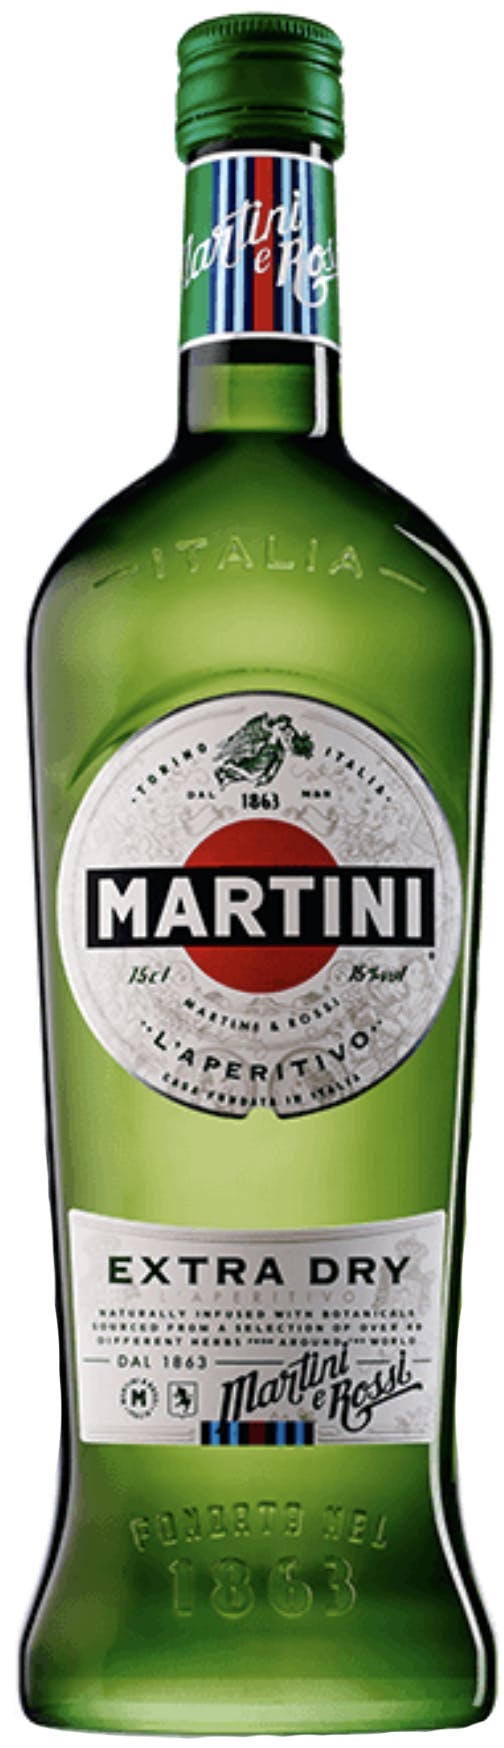 What is the difference between Martini and Rossi Bianco vermouth and extra  dry vermouth? - Quora